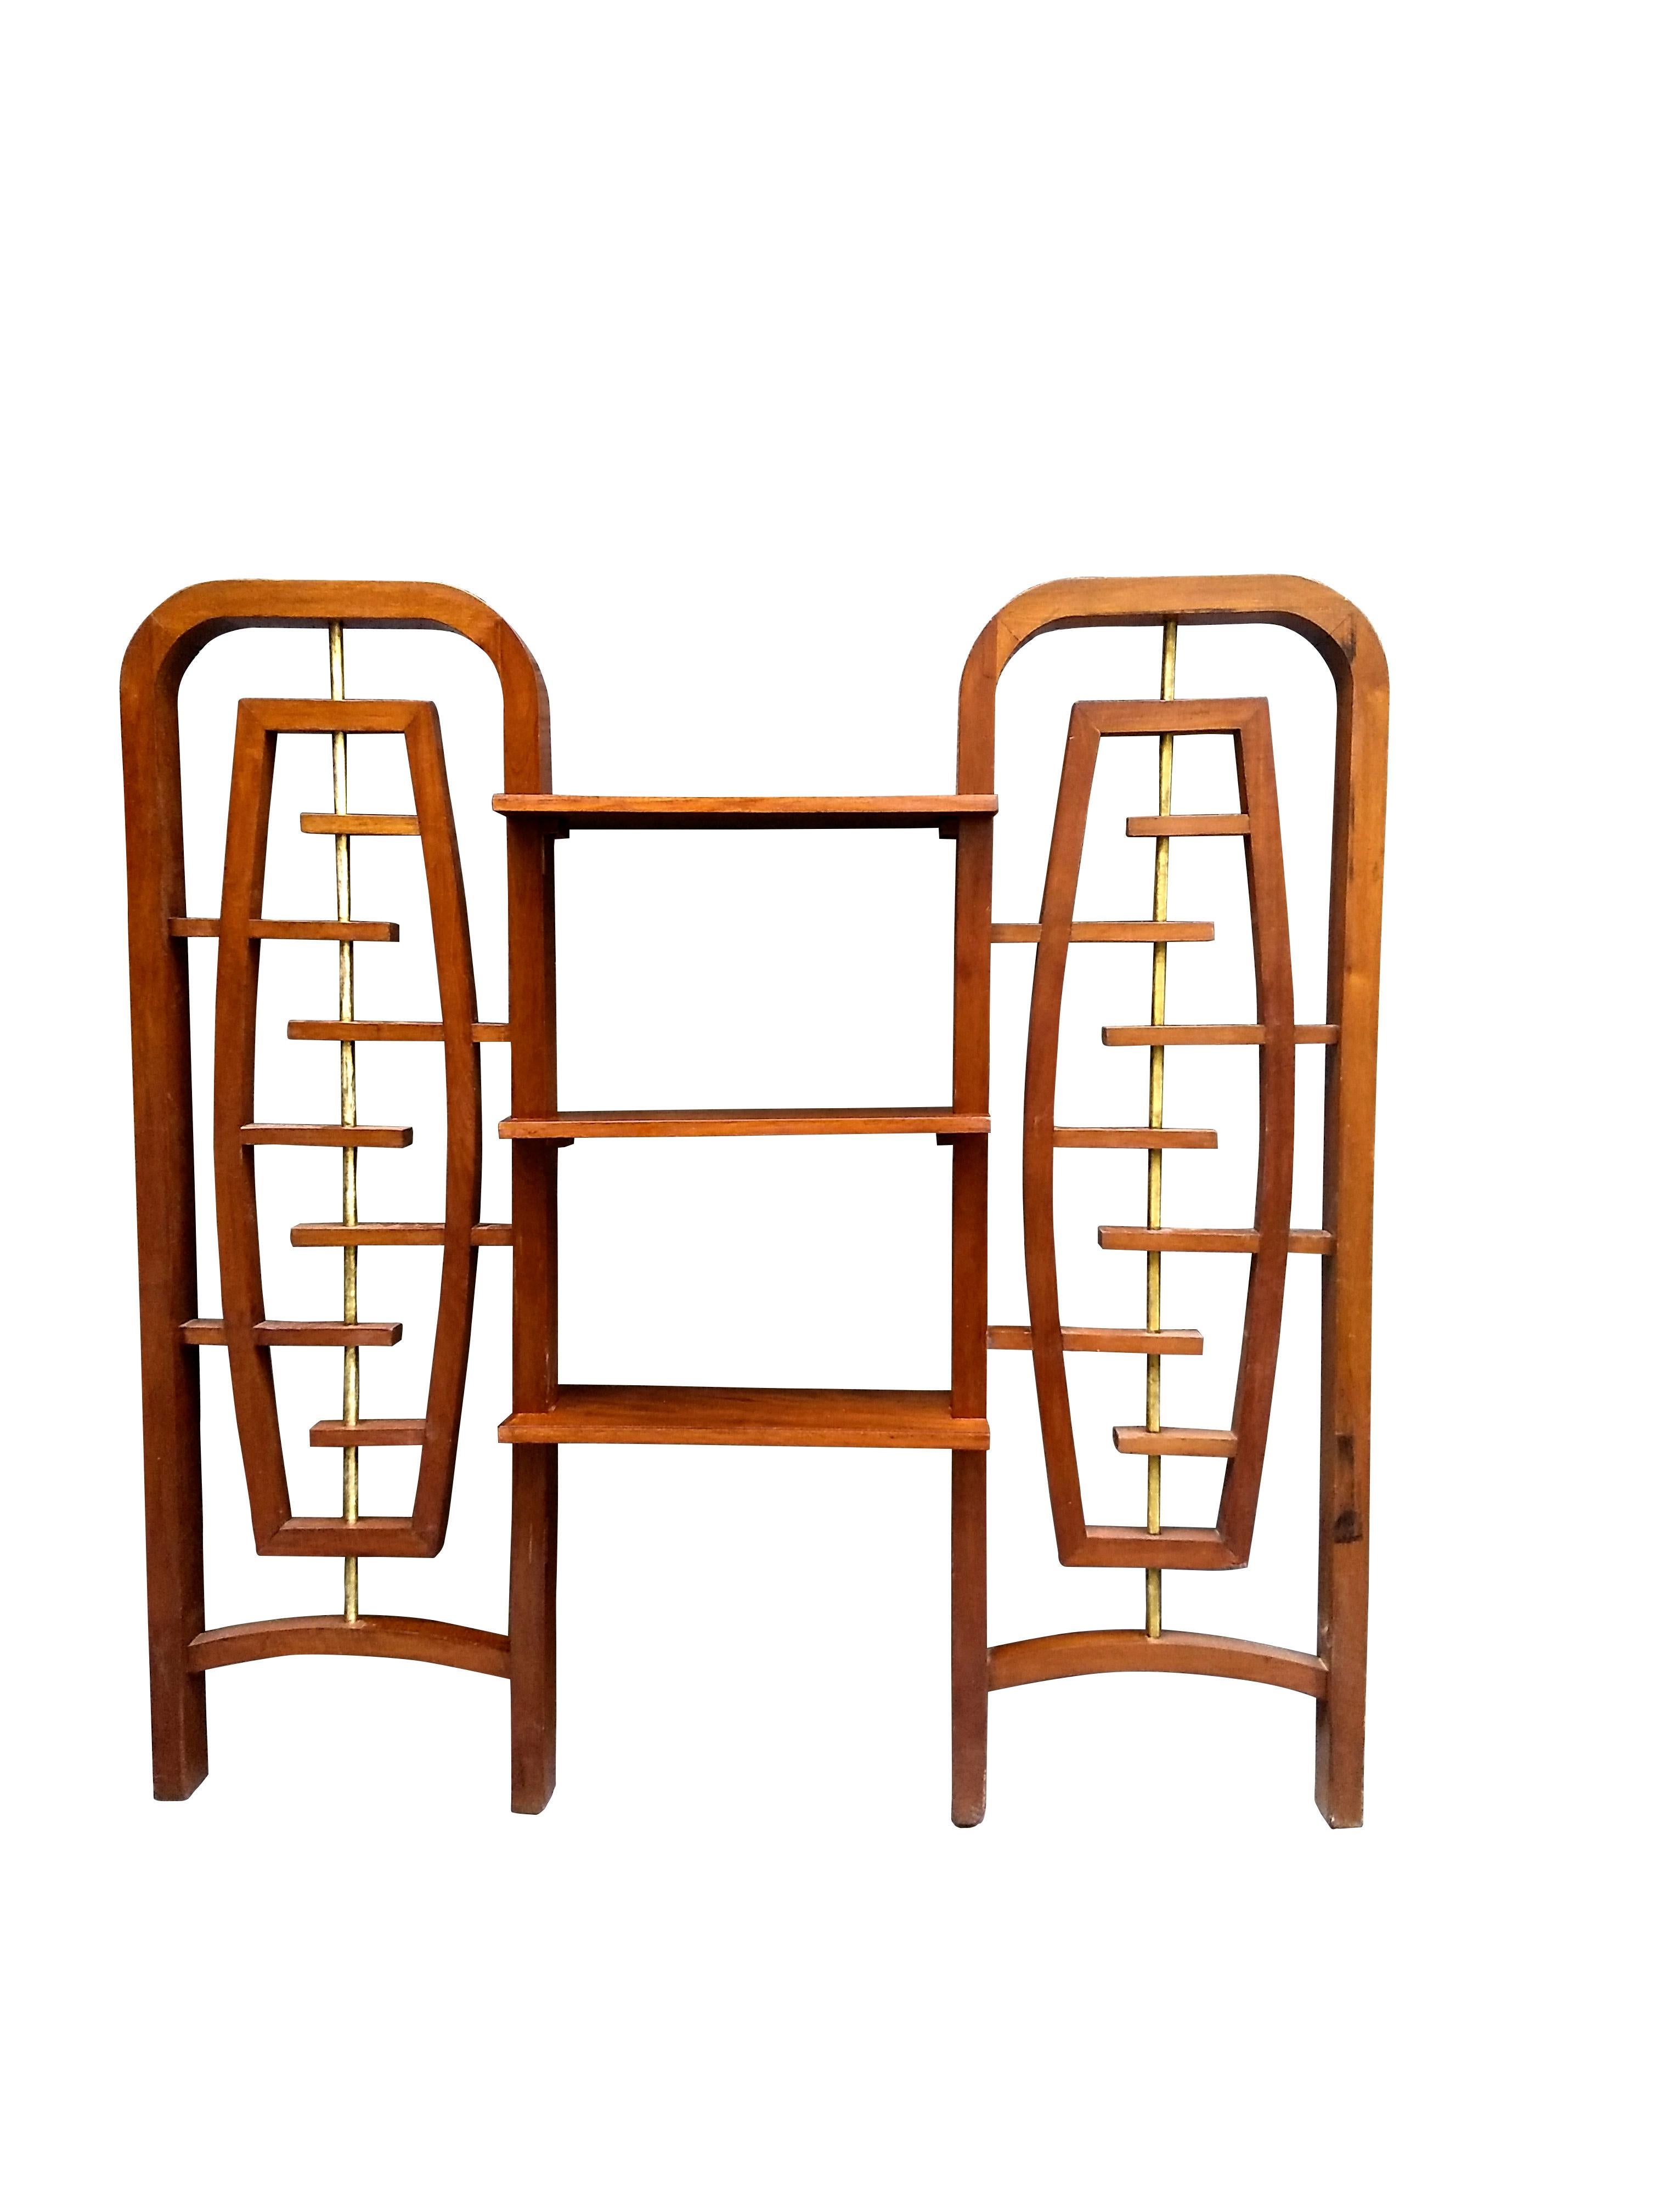 Amazing Mid-Century Modern Mexican room divider formed with two structures in mahogany and polished brass attached by three horizontal shelves in the style of Eugenio Escudero. Each vertical structure features a floating like element within its